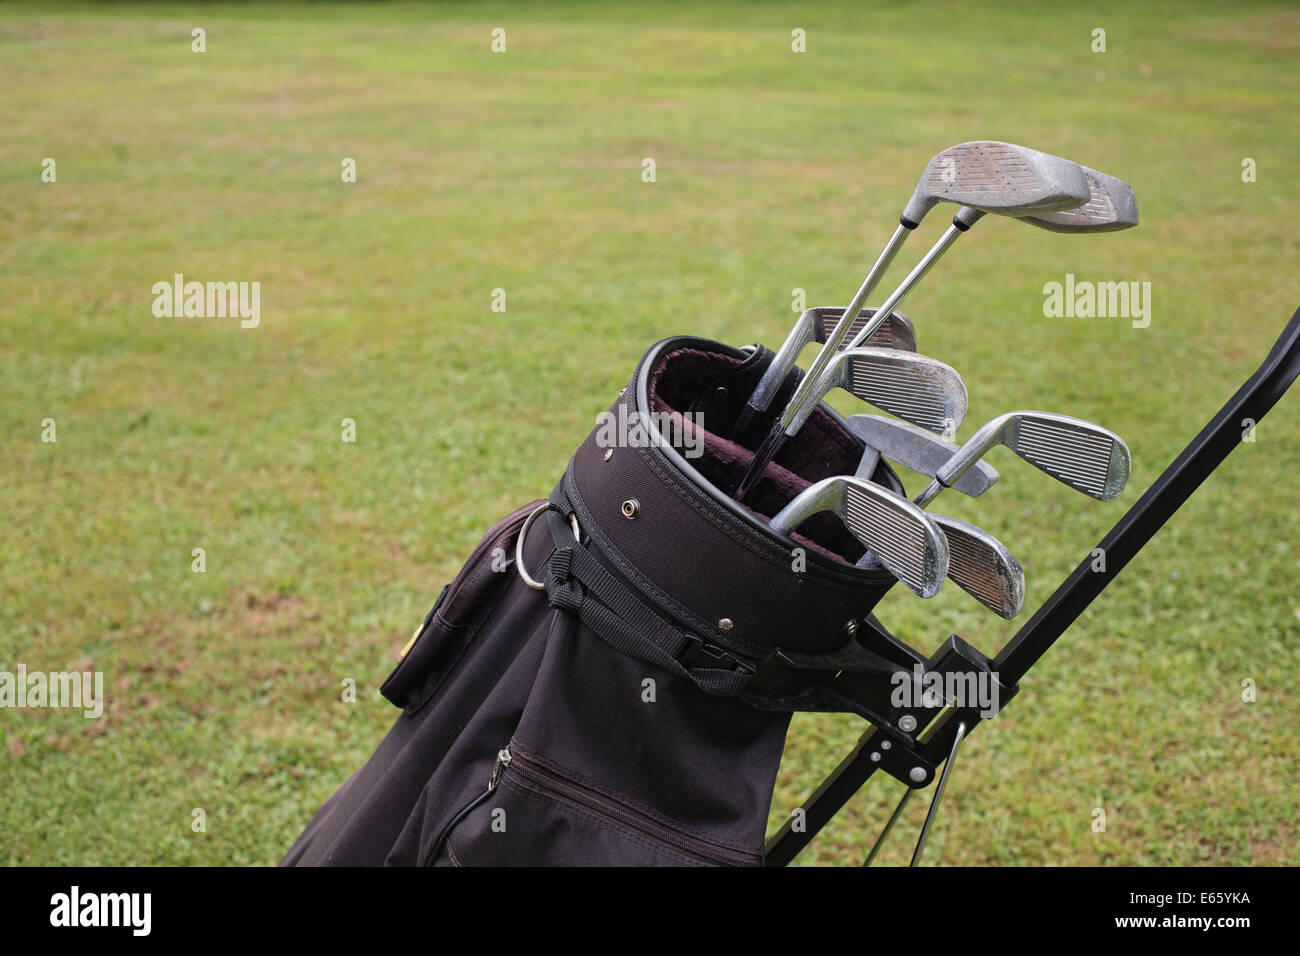 Golf clubs and bag detail with grass background. Stock Photo